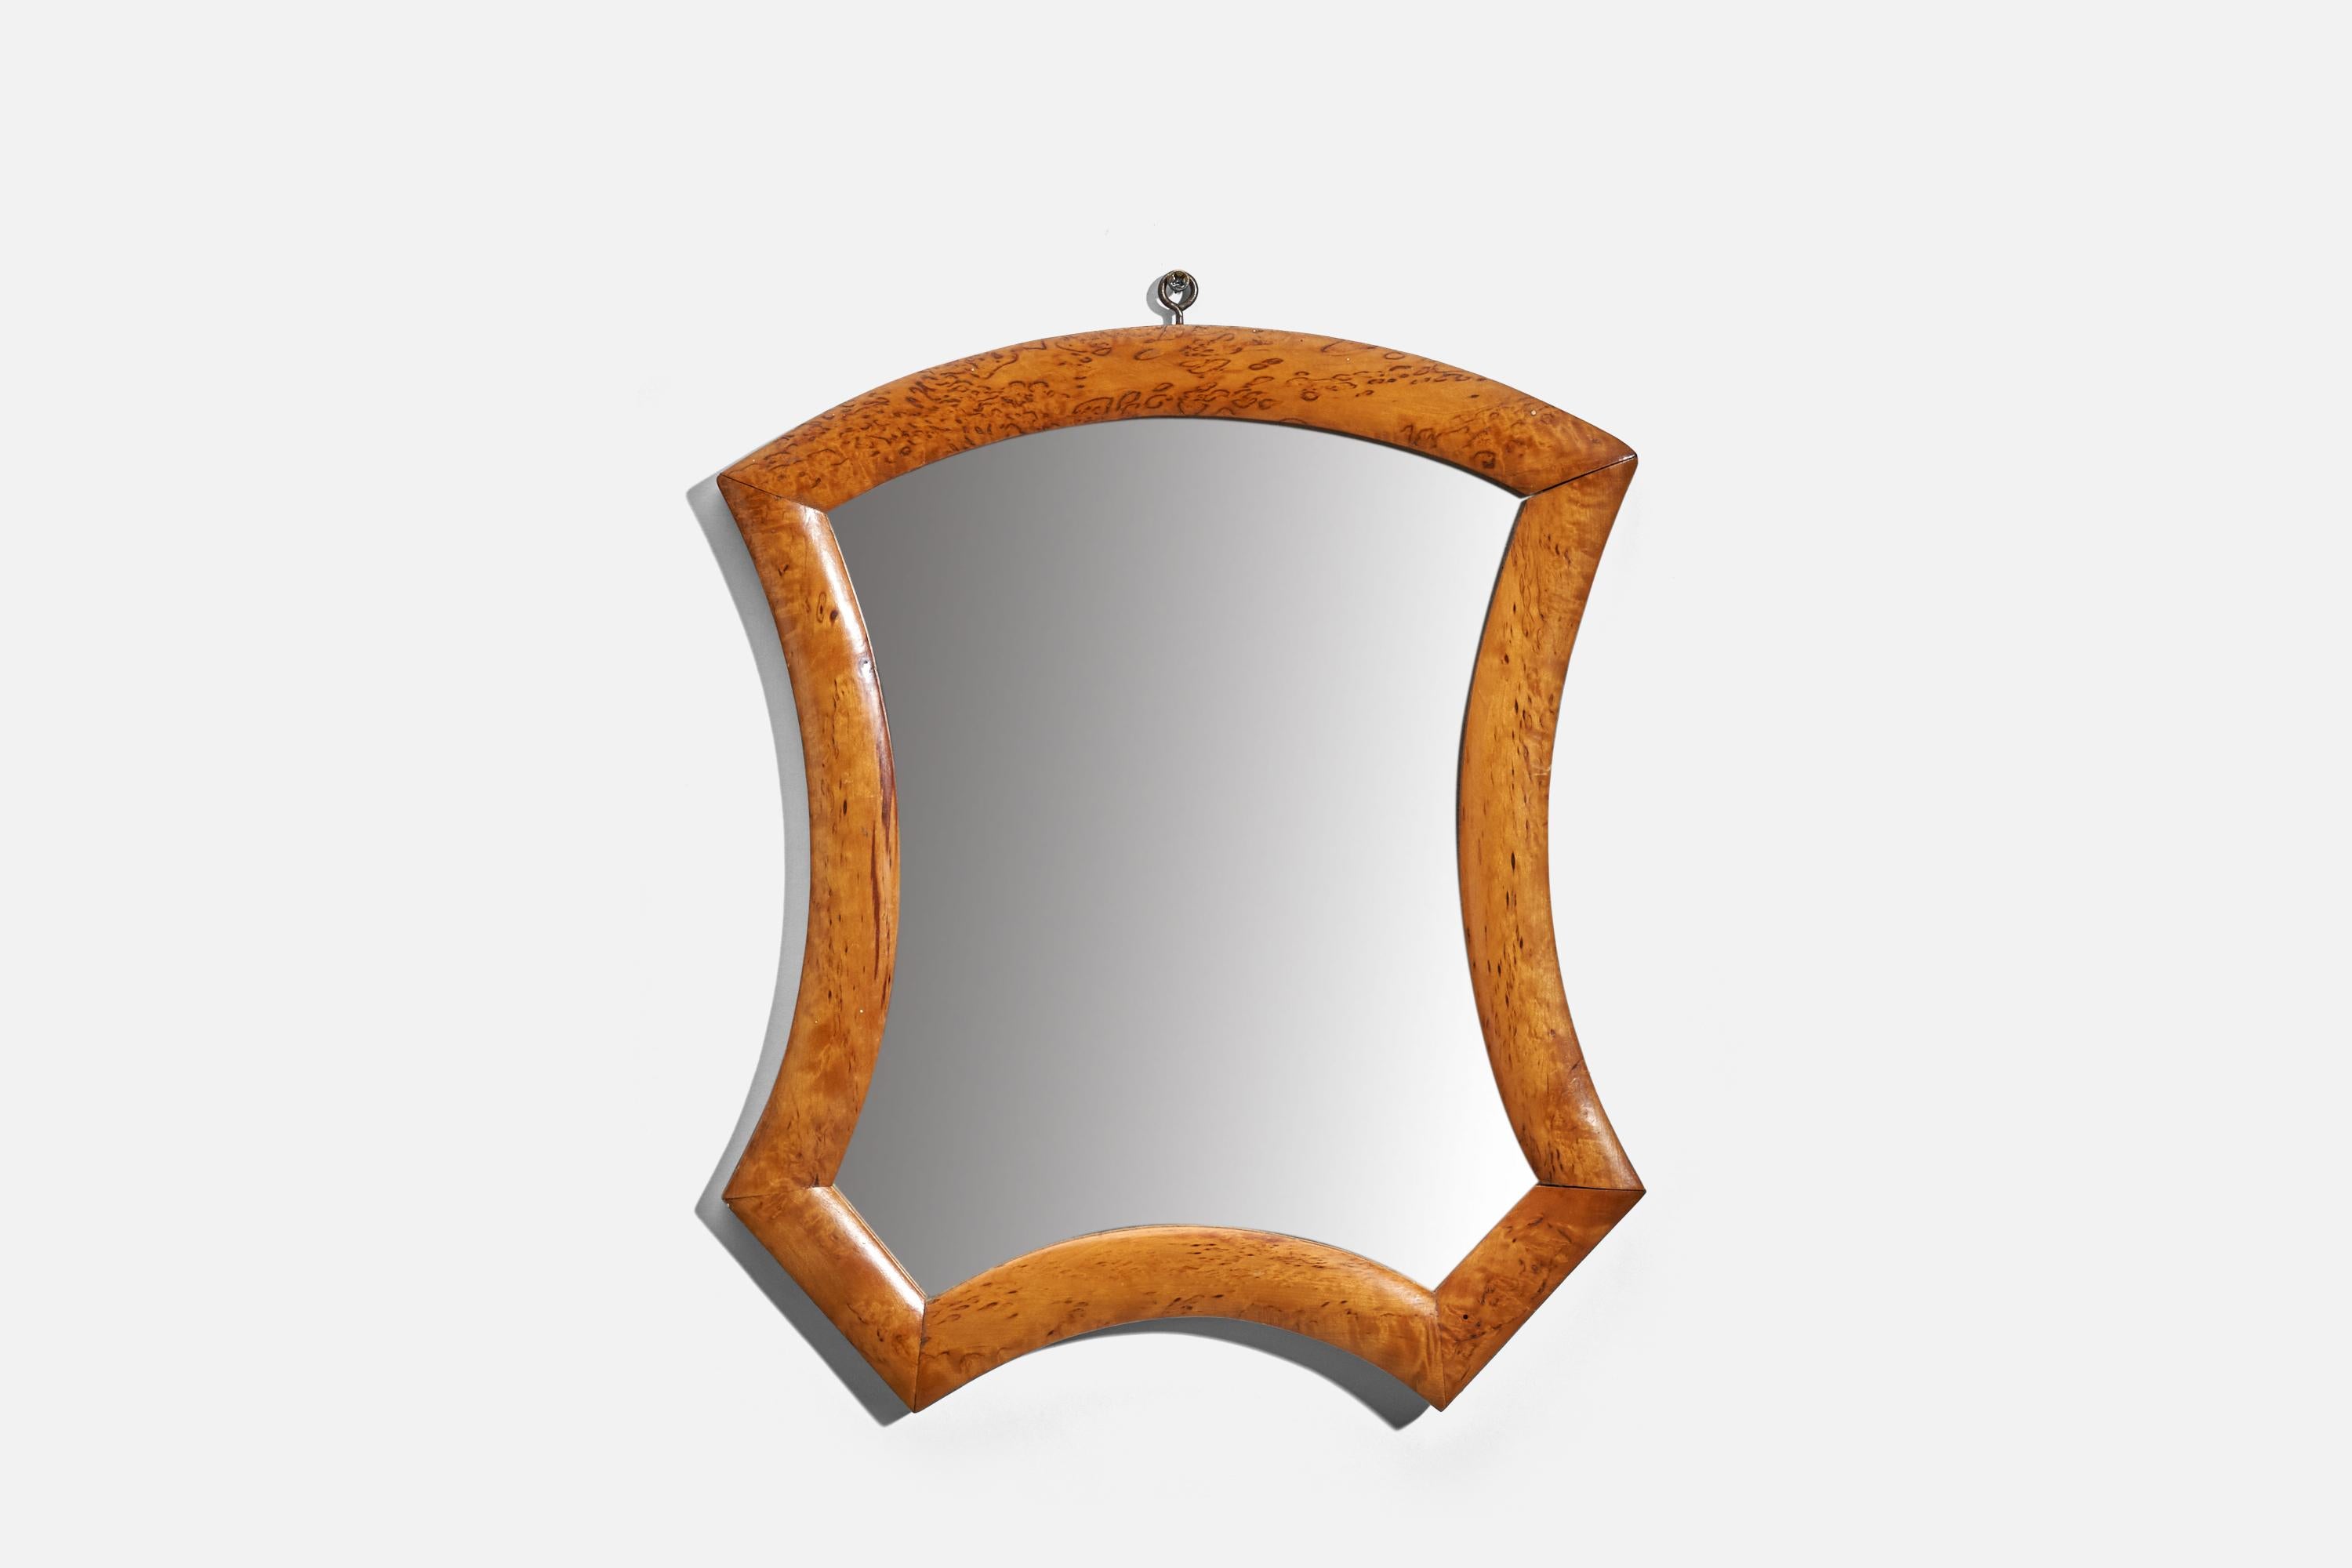 A masur birch wall mirror designed and produced in Sweden, 1930s.